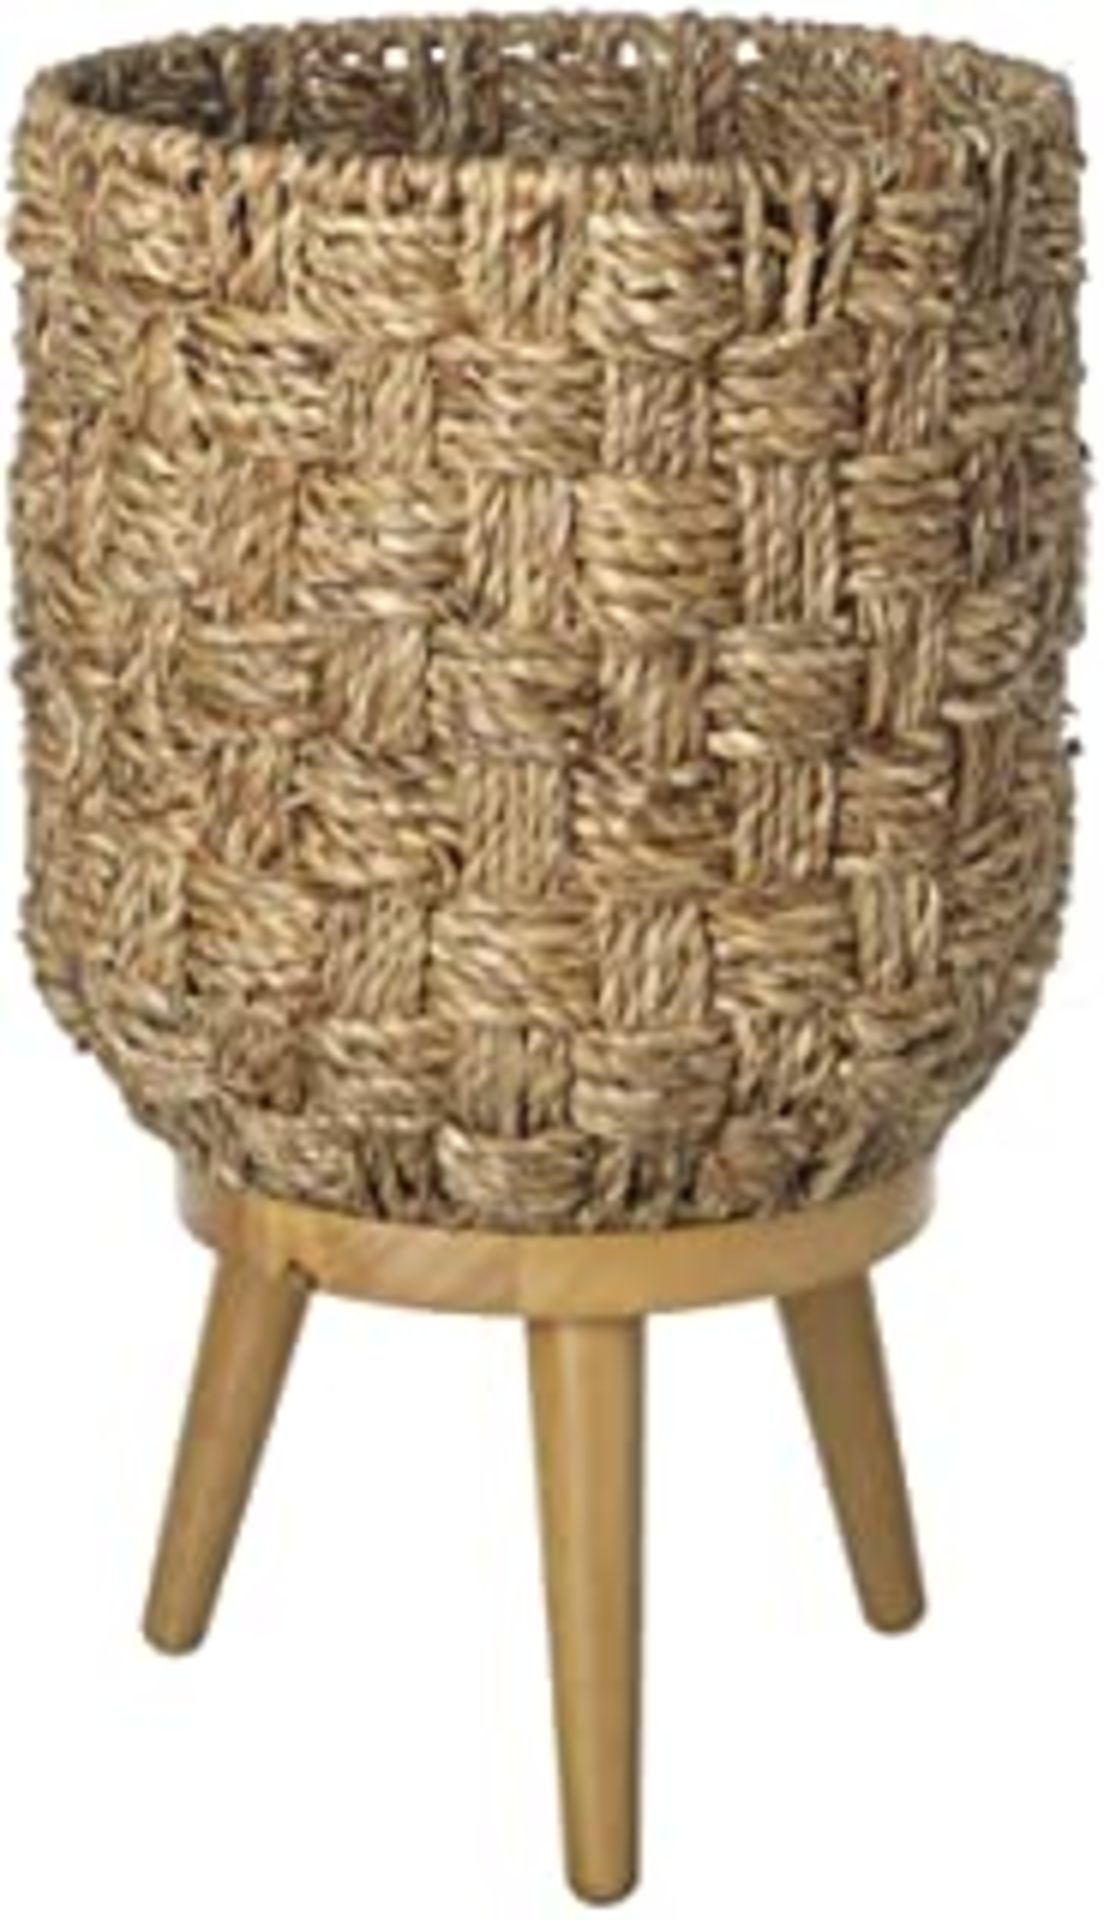 Peru Planter Natural seagrass 300x515mmh Brand New Parlane Accessories We take our product seriously - Bild 2 aus 2